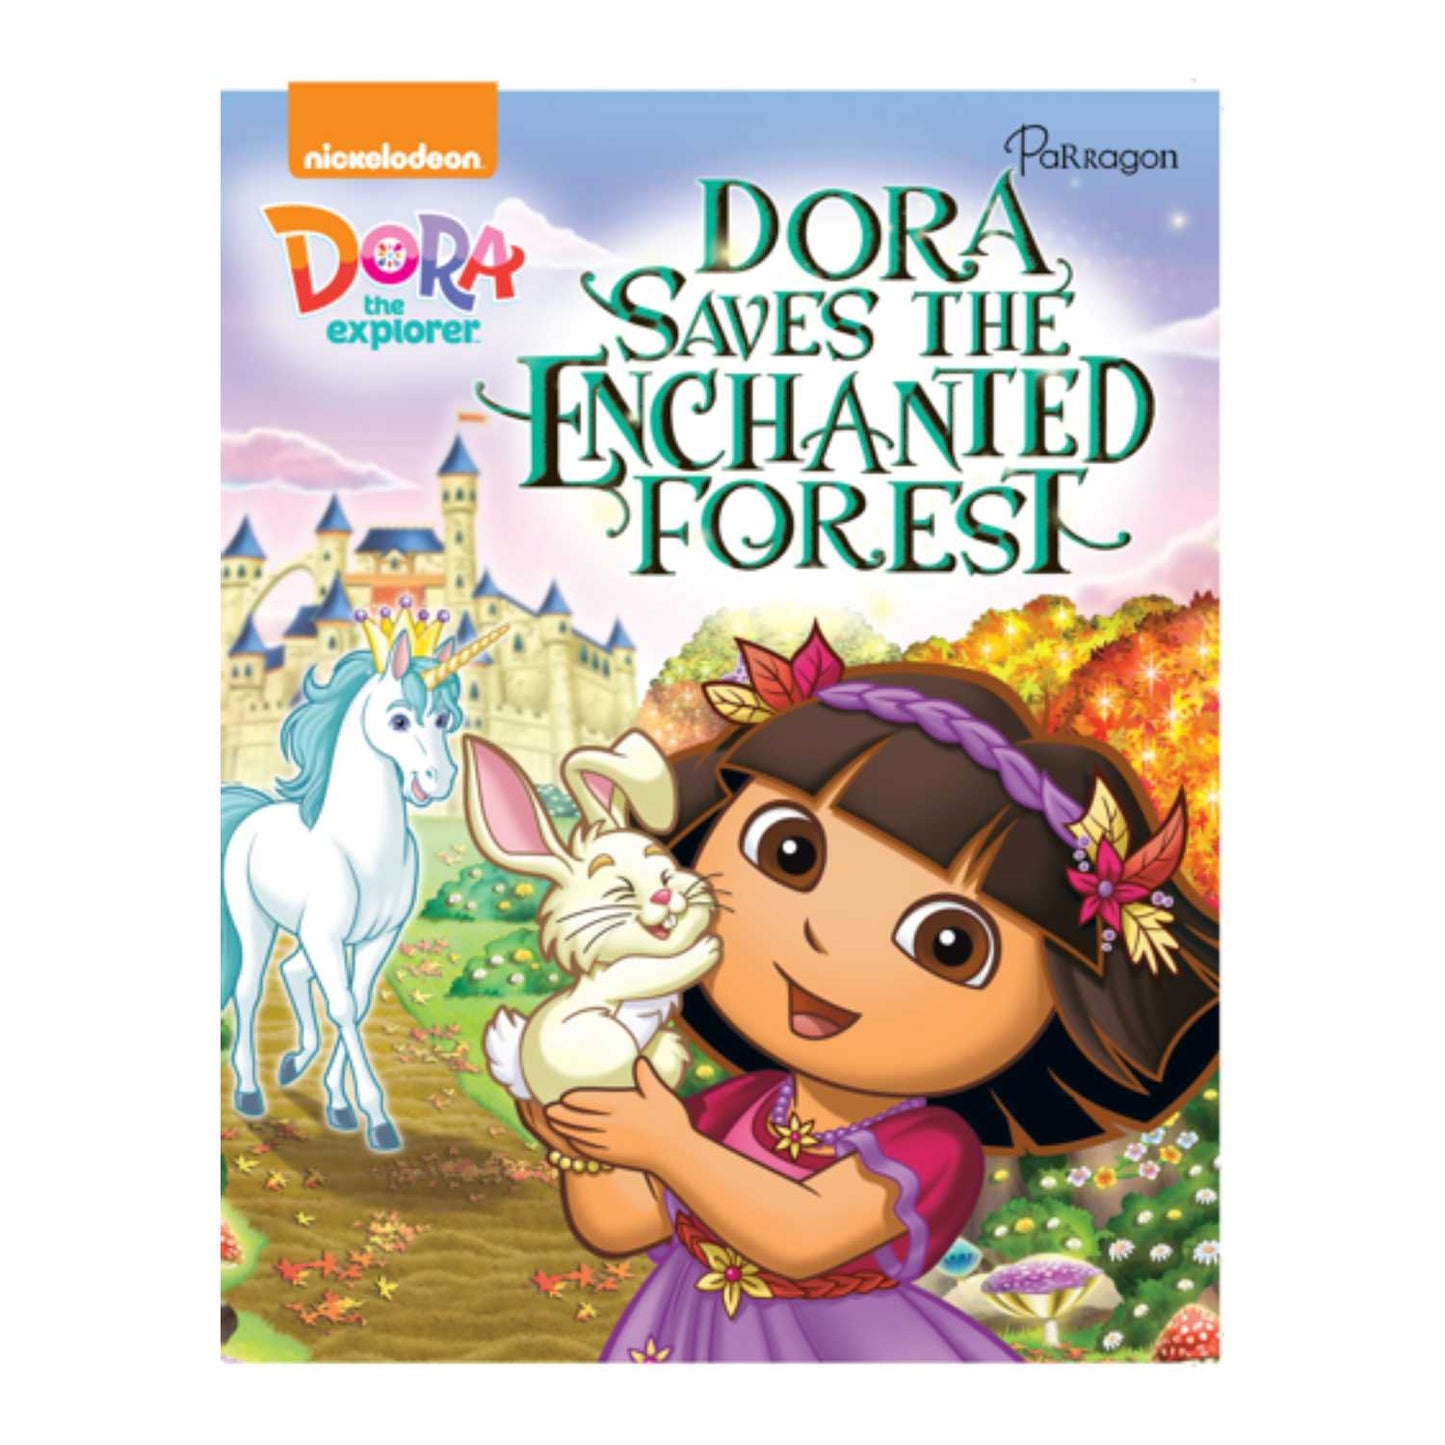 Dora the Explorer Dora Saves the Enchanted Forest Storybook [Paperback] Nickelodeon Parragon Publishing India